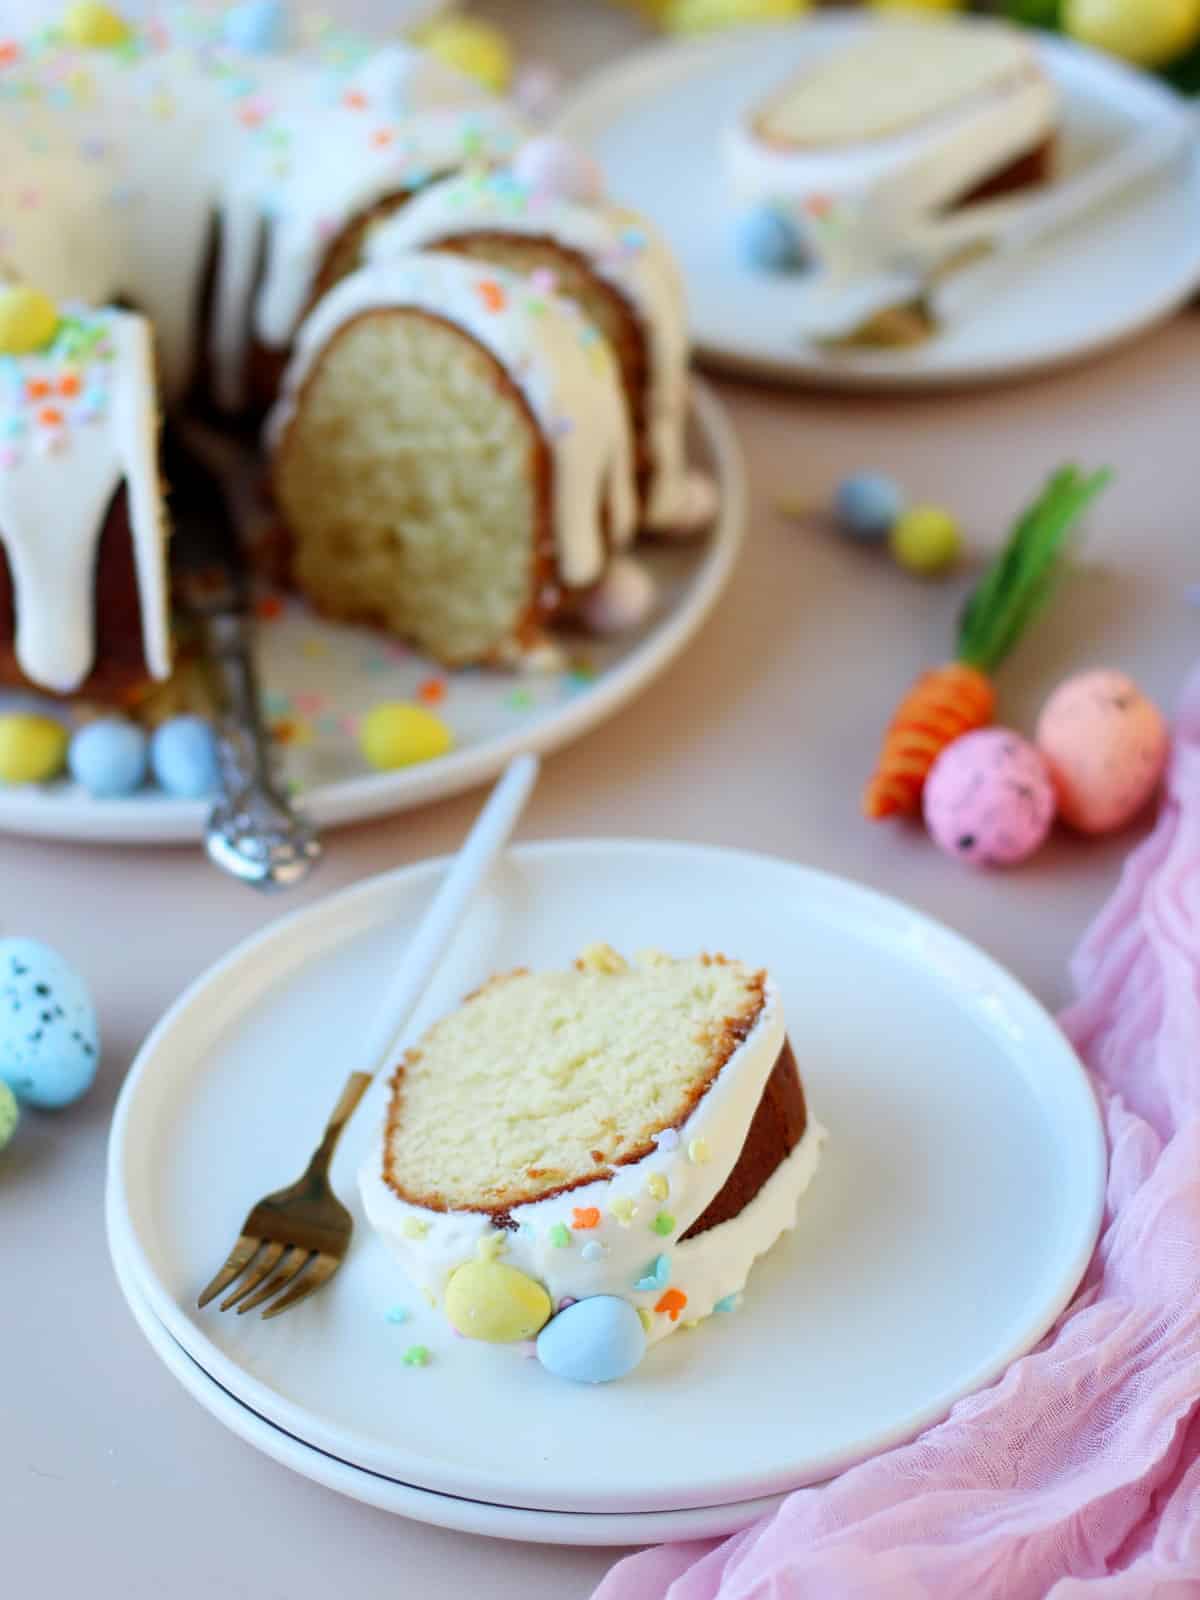 slice of vanilla bundt cake topped with cream cheese and colourful spring sprinkles, the slice of cake is on white plate, behind is the bundt cake with few slices cut on a plate.